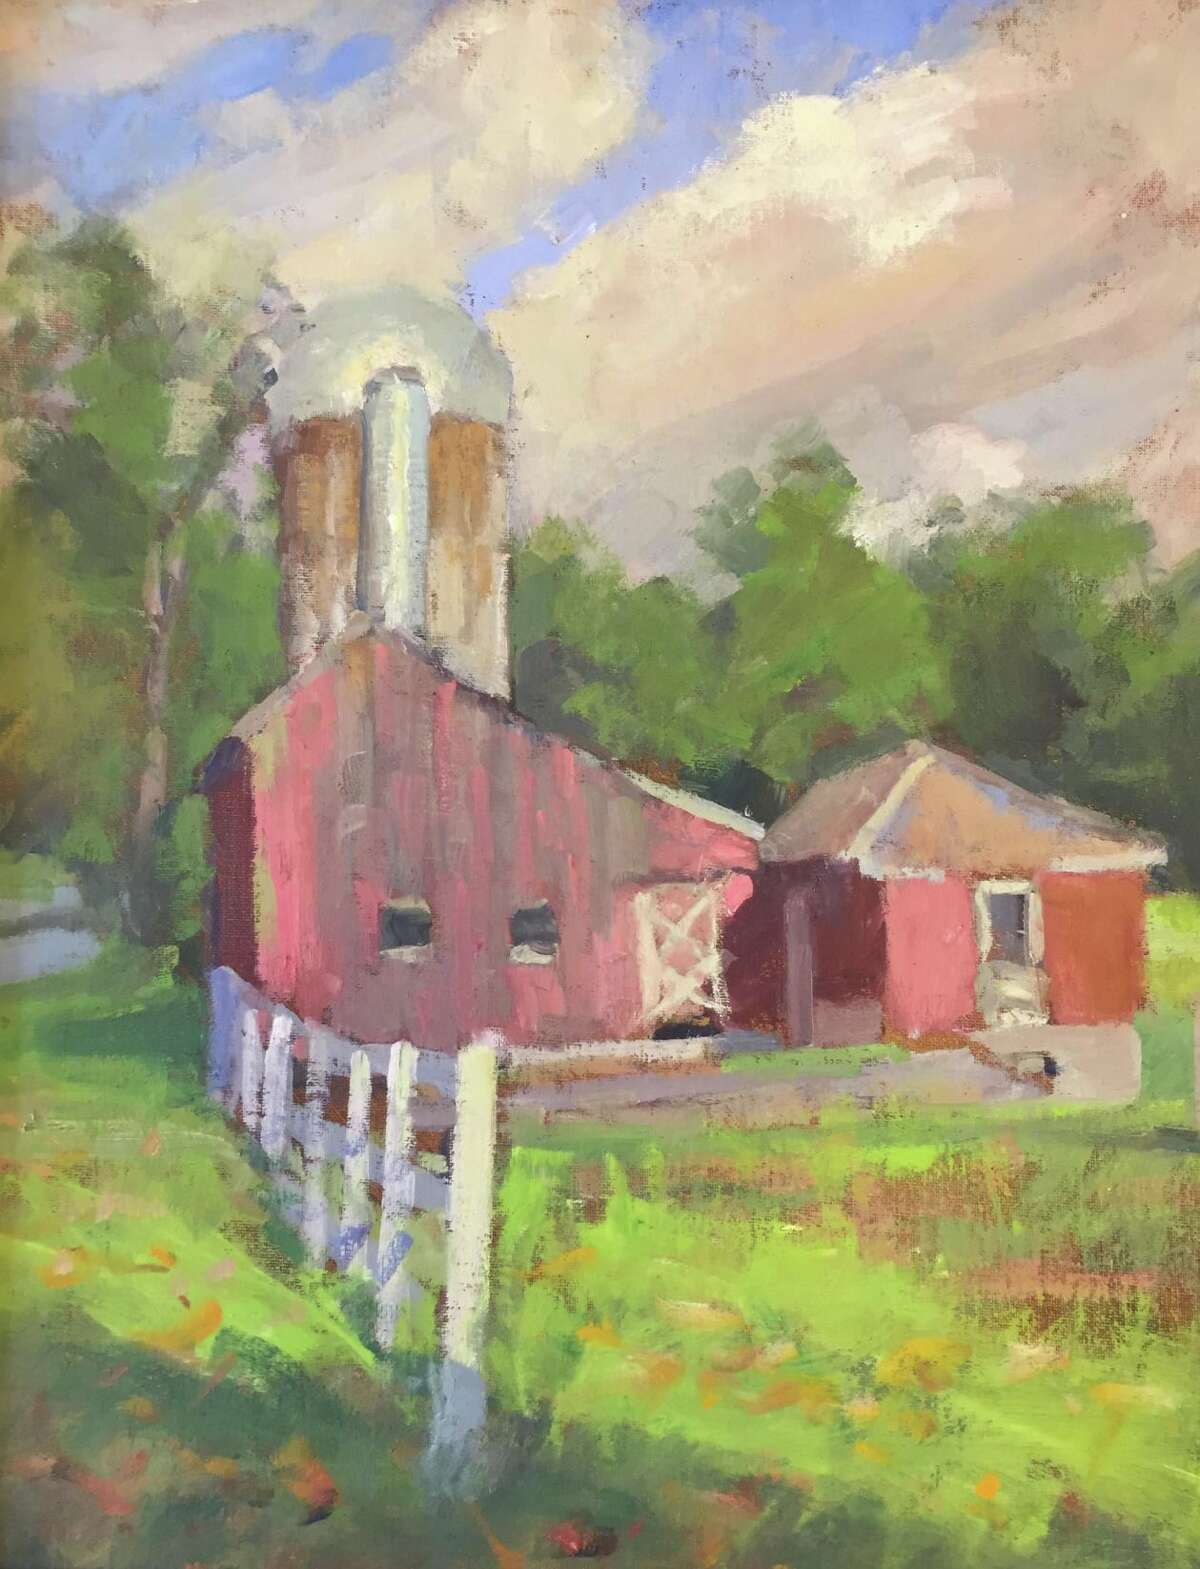 “Barn in South Kent” oil on canvas, one of the many paintings included in Susan Grisell’s exhibit People, Places and Things. The paintings will be on display from Jan. 15 to Feb. 29 in the Kent Memorial Library’s temporary gallery.